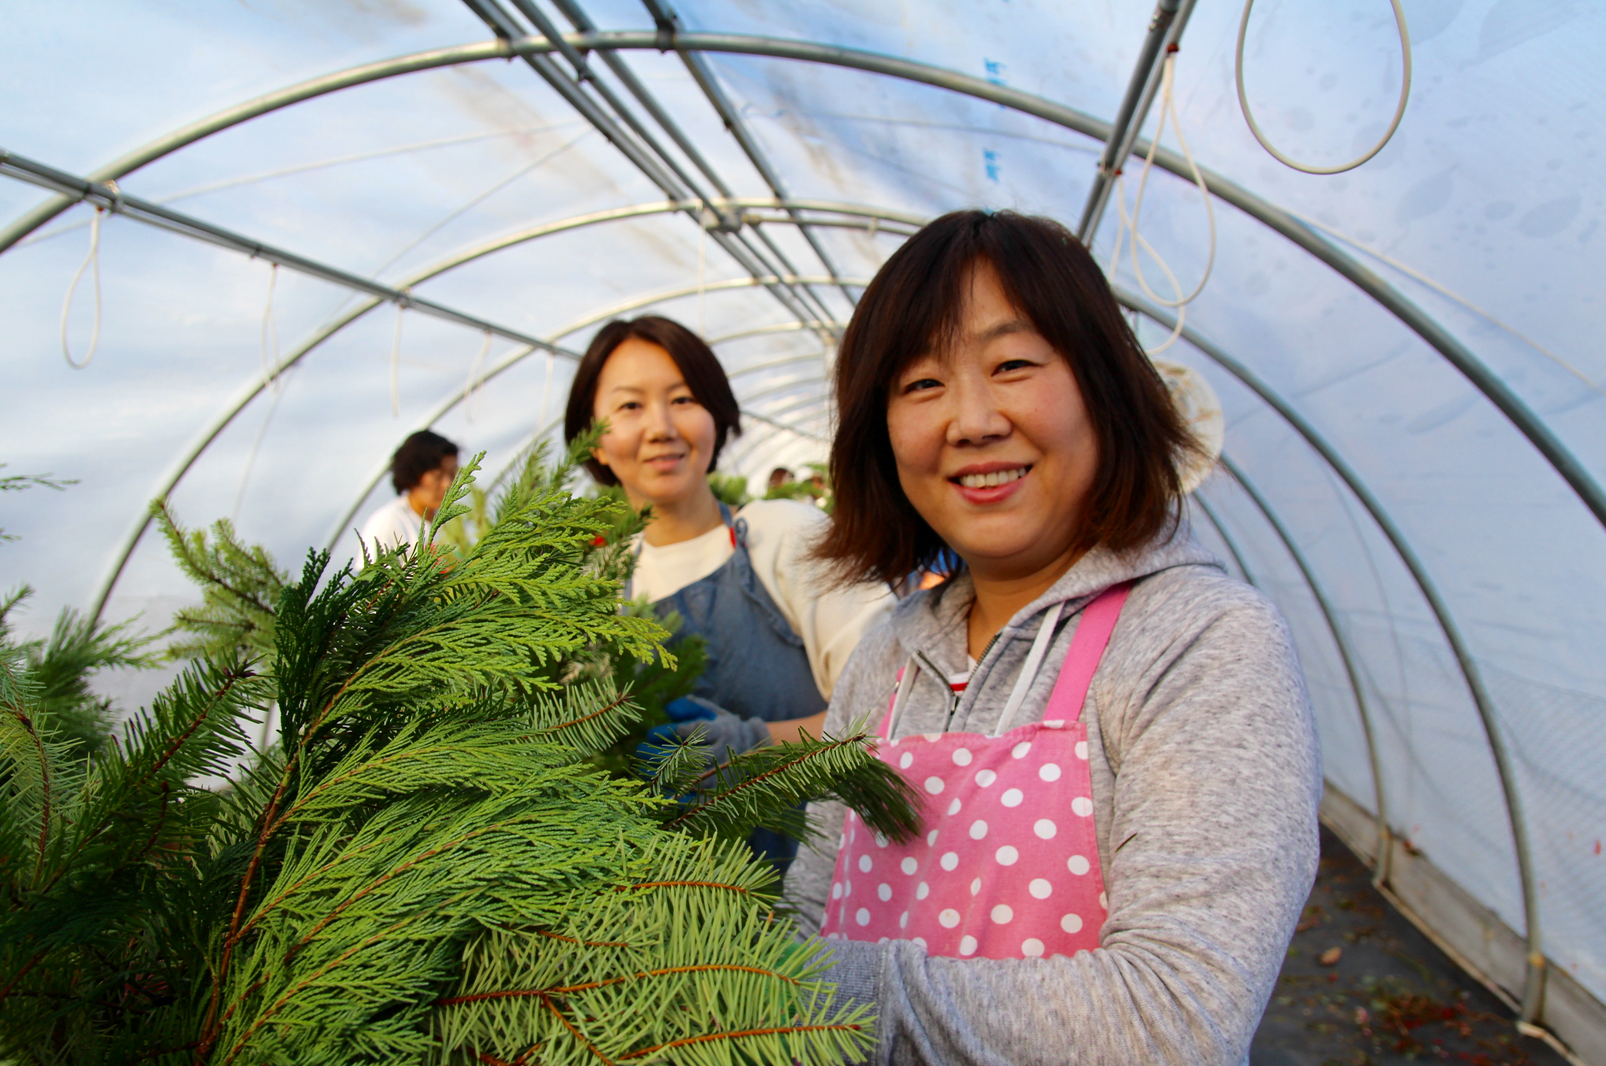 About 30 Japanese women gathered with Mary Hull and Sally Davies of Greenwich Green & Clean at Sam Bridge Nursery & Greenhouses on North Street to arrange holiday baskets of greenery. Photo: Leslie Yager